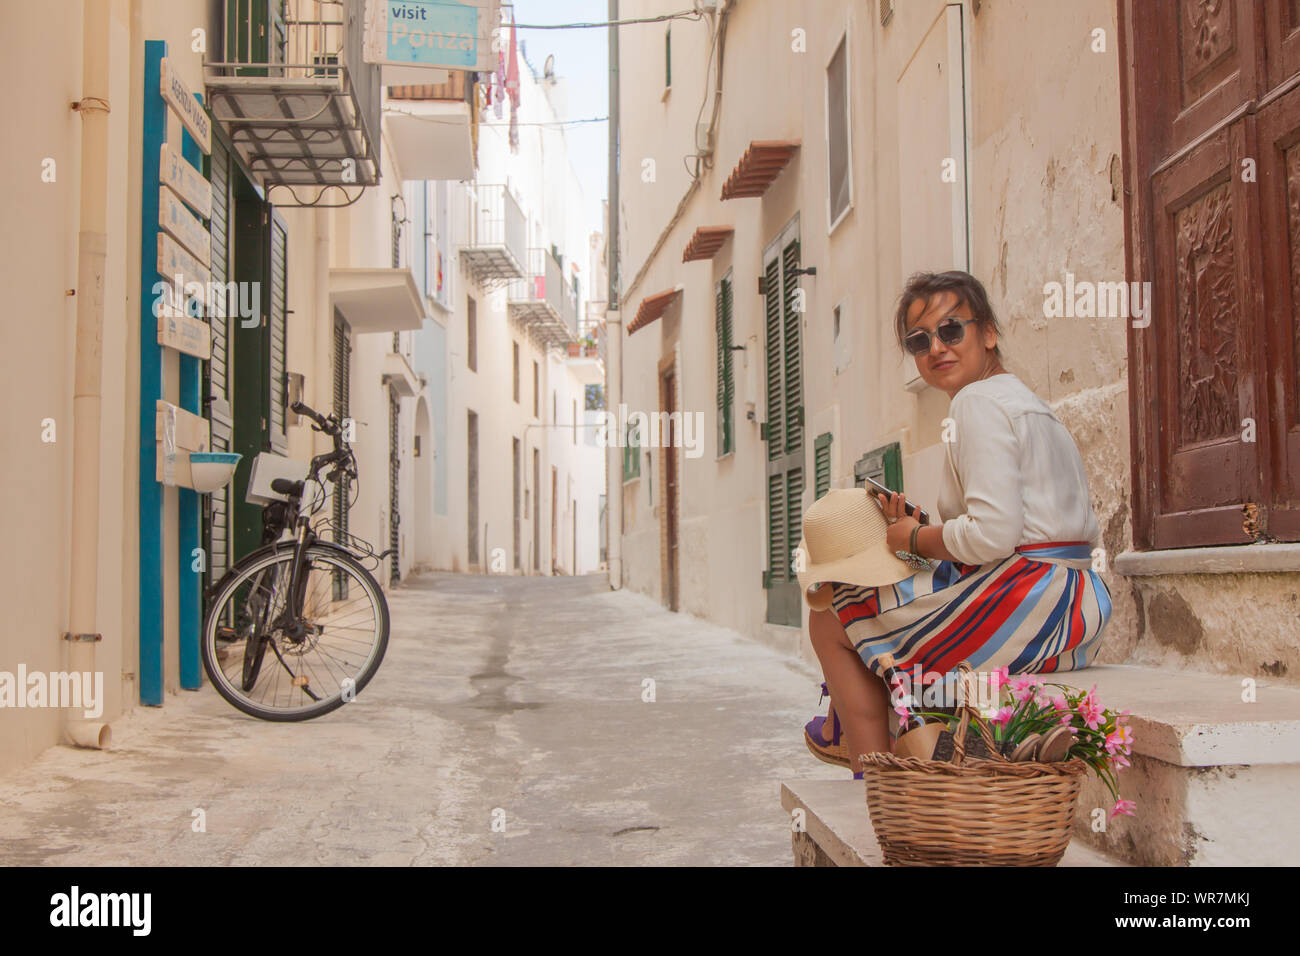 Young woman sitting on door steps in a typical alley on Ponza island town, Italy. Fashion dress and sunglasses, white building. Stock Photo